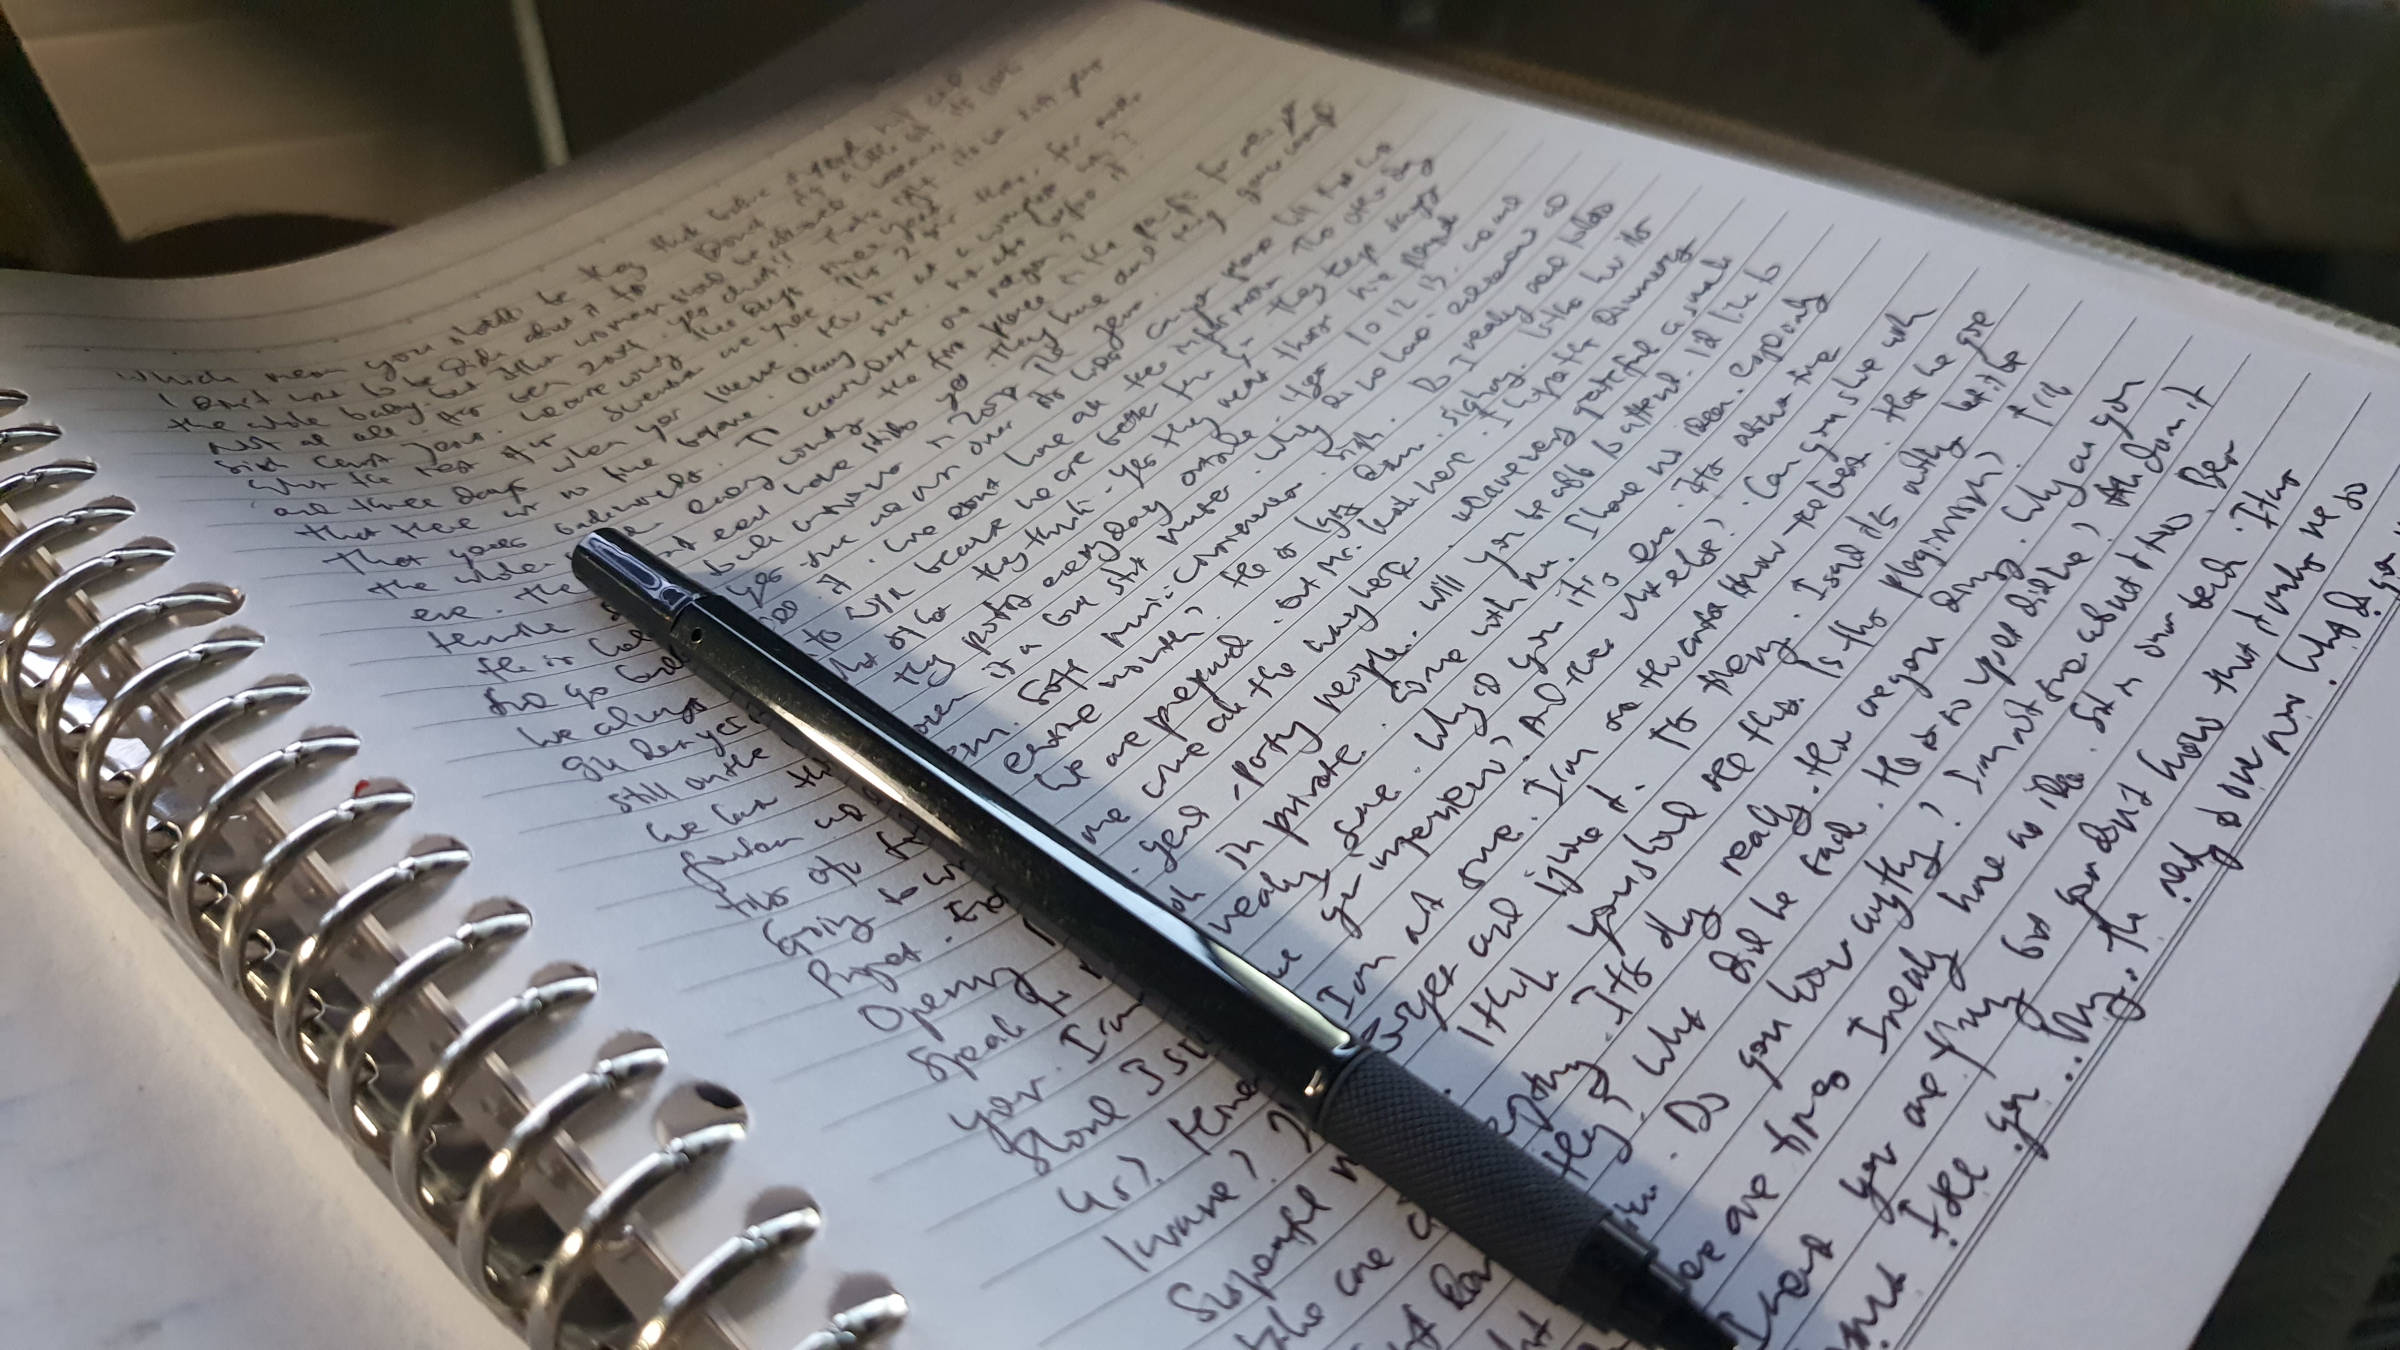 Written text on a spiral-bound paper notebook with a pen lying on top of it.